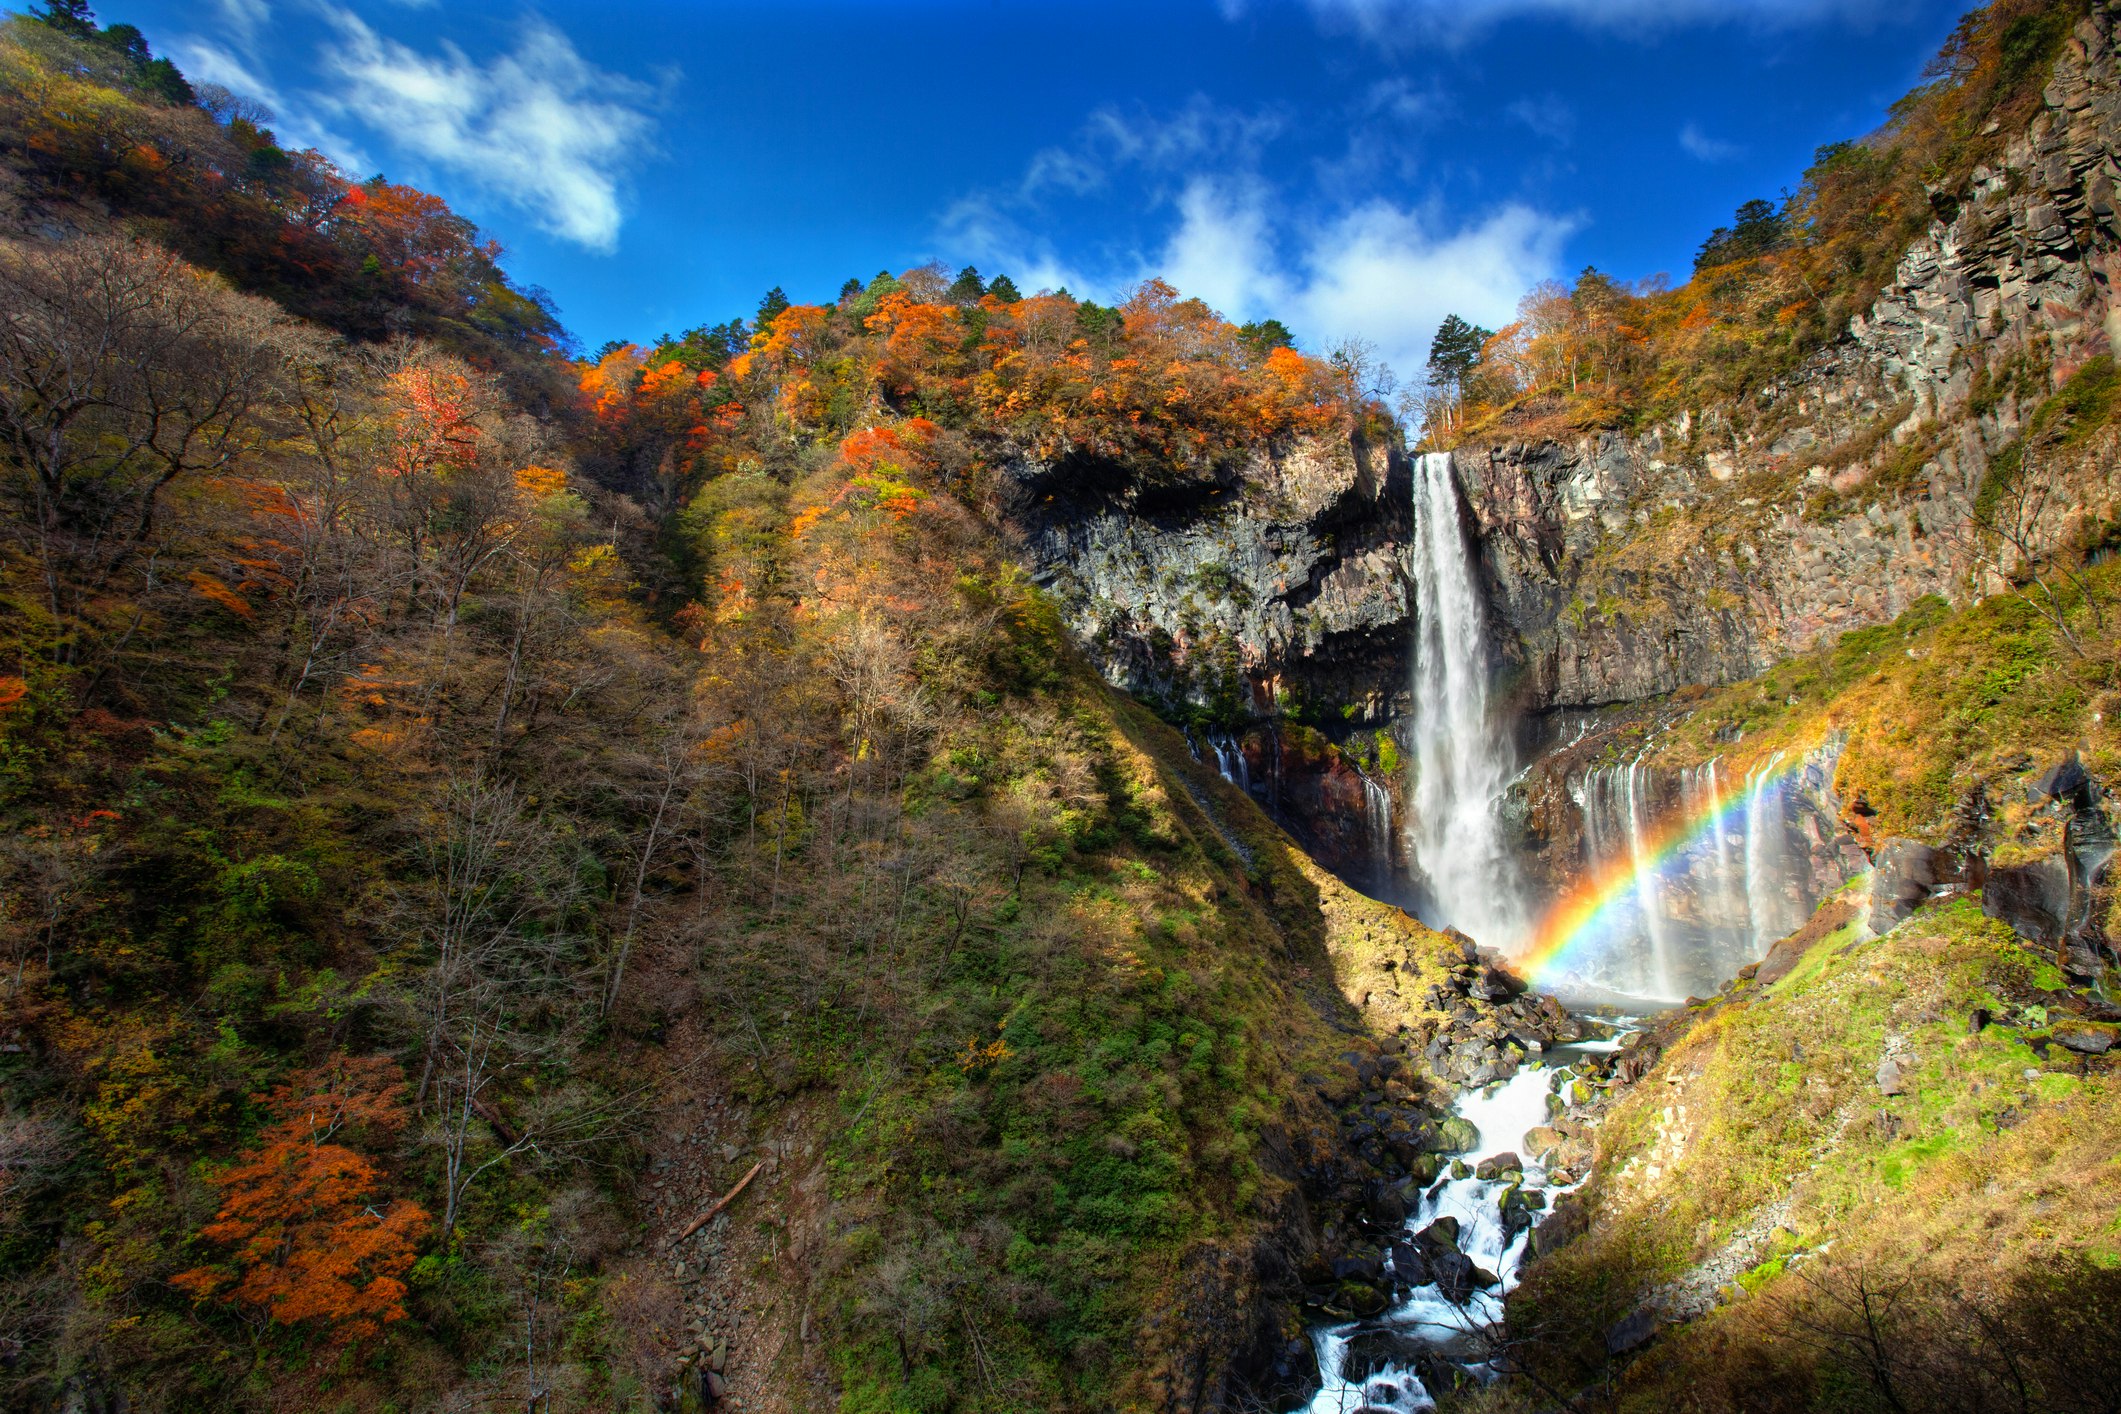 Kegon Falls spills through a crack in the volcanic mountain face of Nikko National Park, which are covered in autumn foliage. A rainbow is formed in the mid ground 